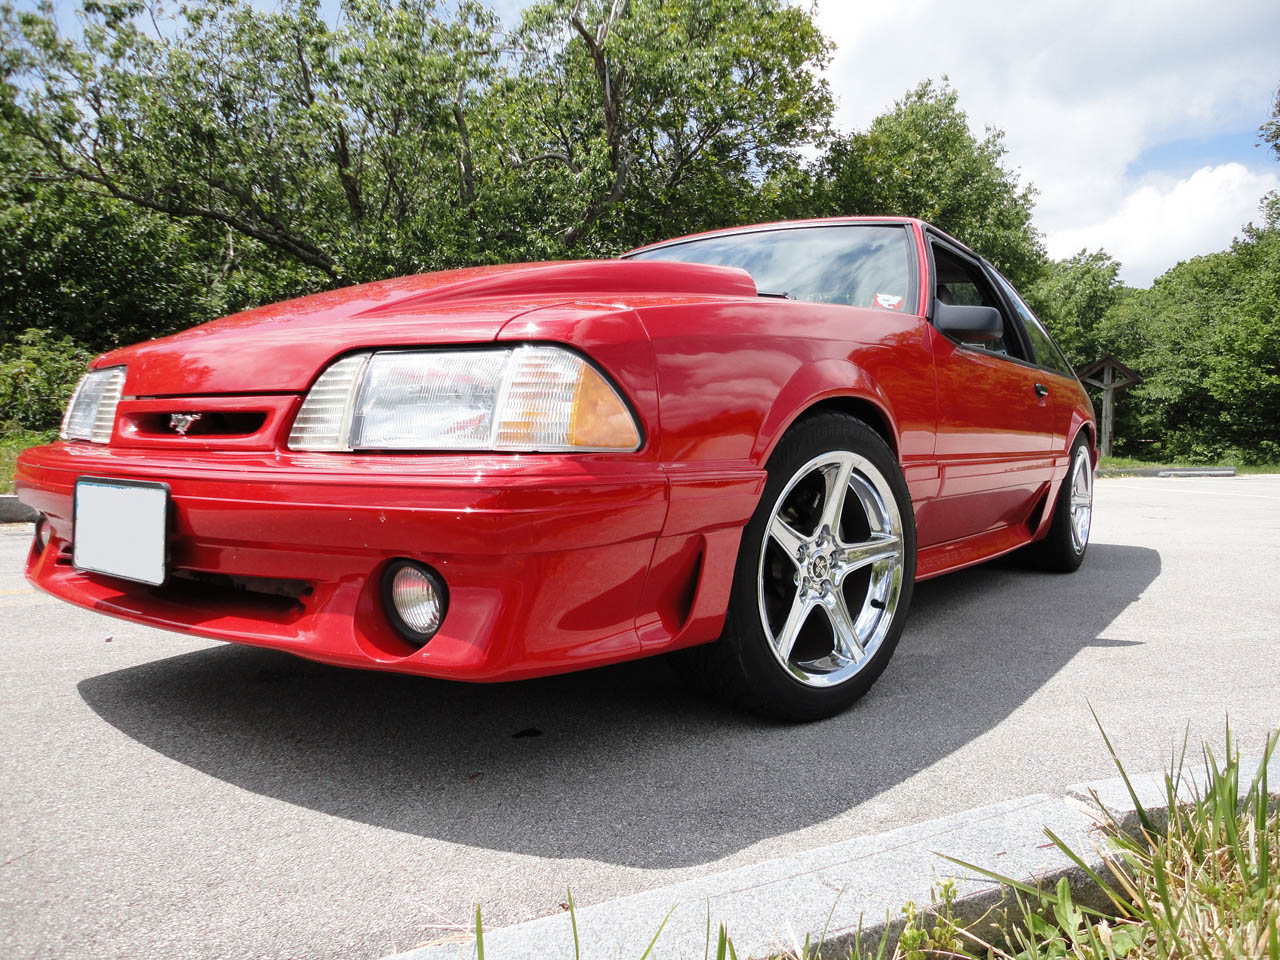 1989 Corvette Victory Red Ford Mustang GT picture, mods, upgrades